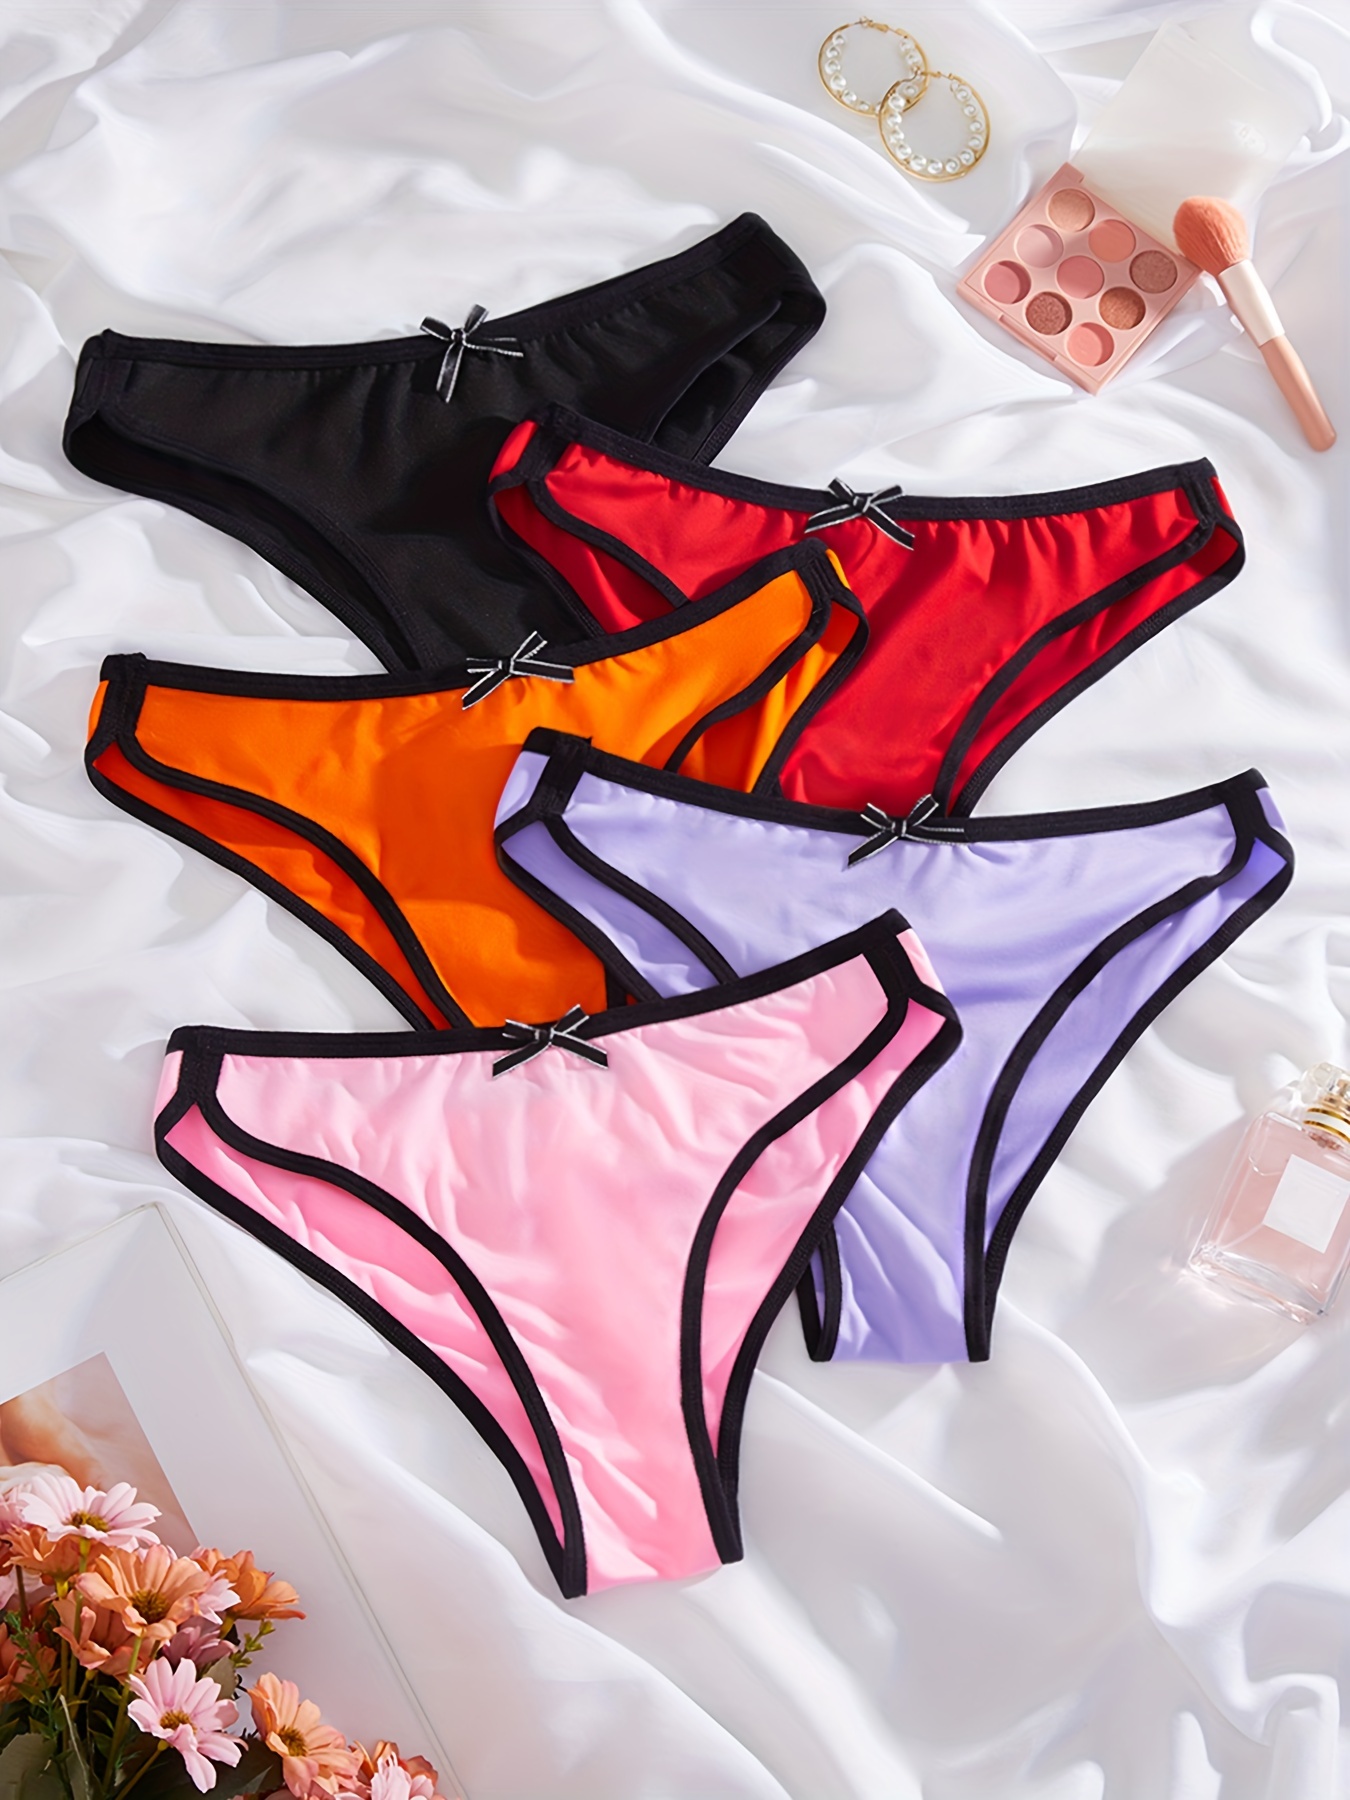 5pcs Bow Tie Panties, Comfy & Breathable Stretchy Intimates Panties,  Women's Lingerie & Underwear